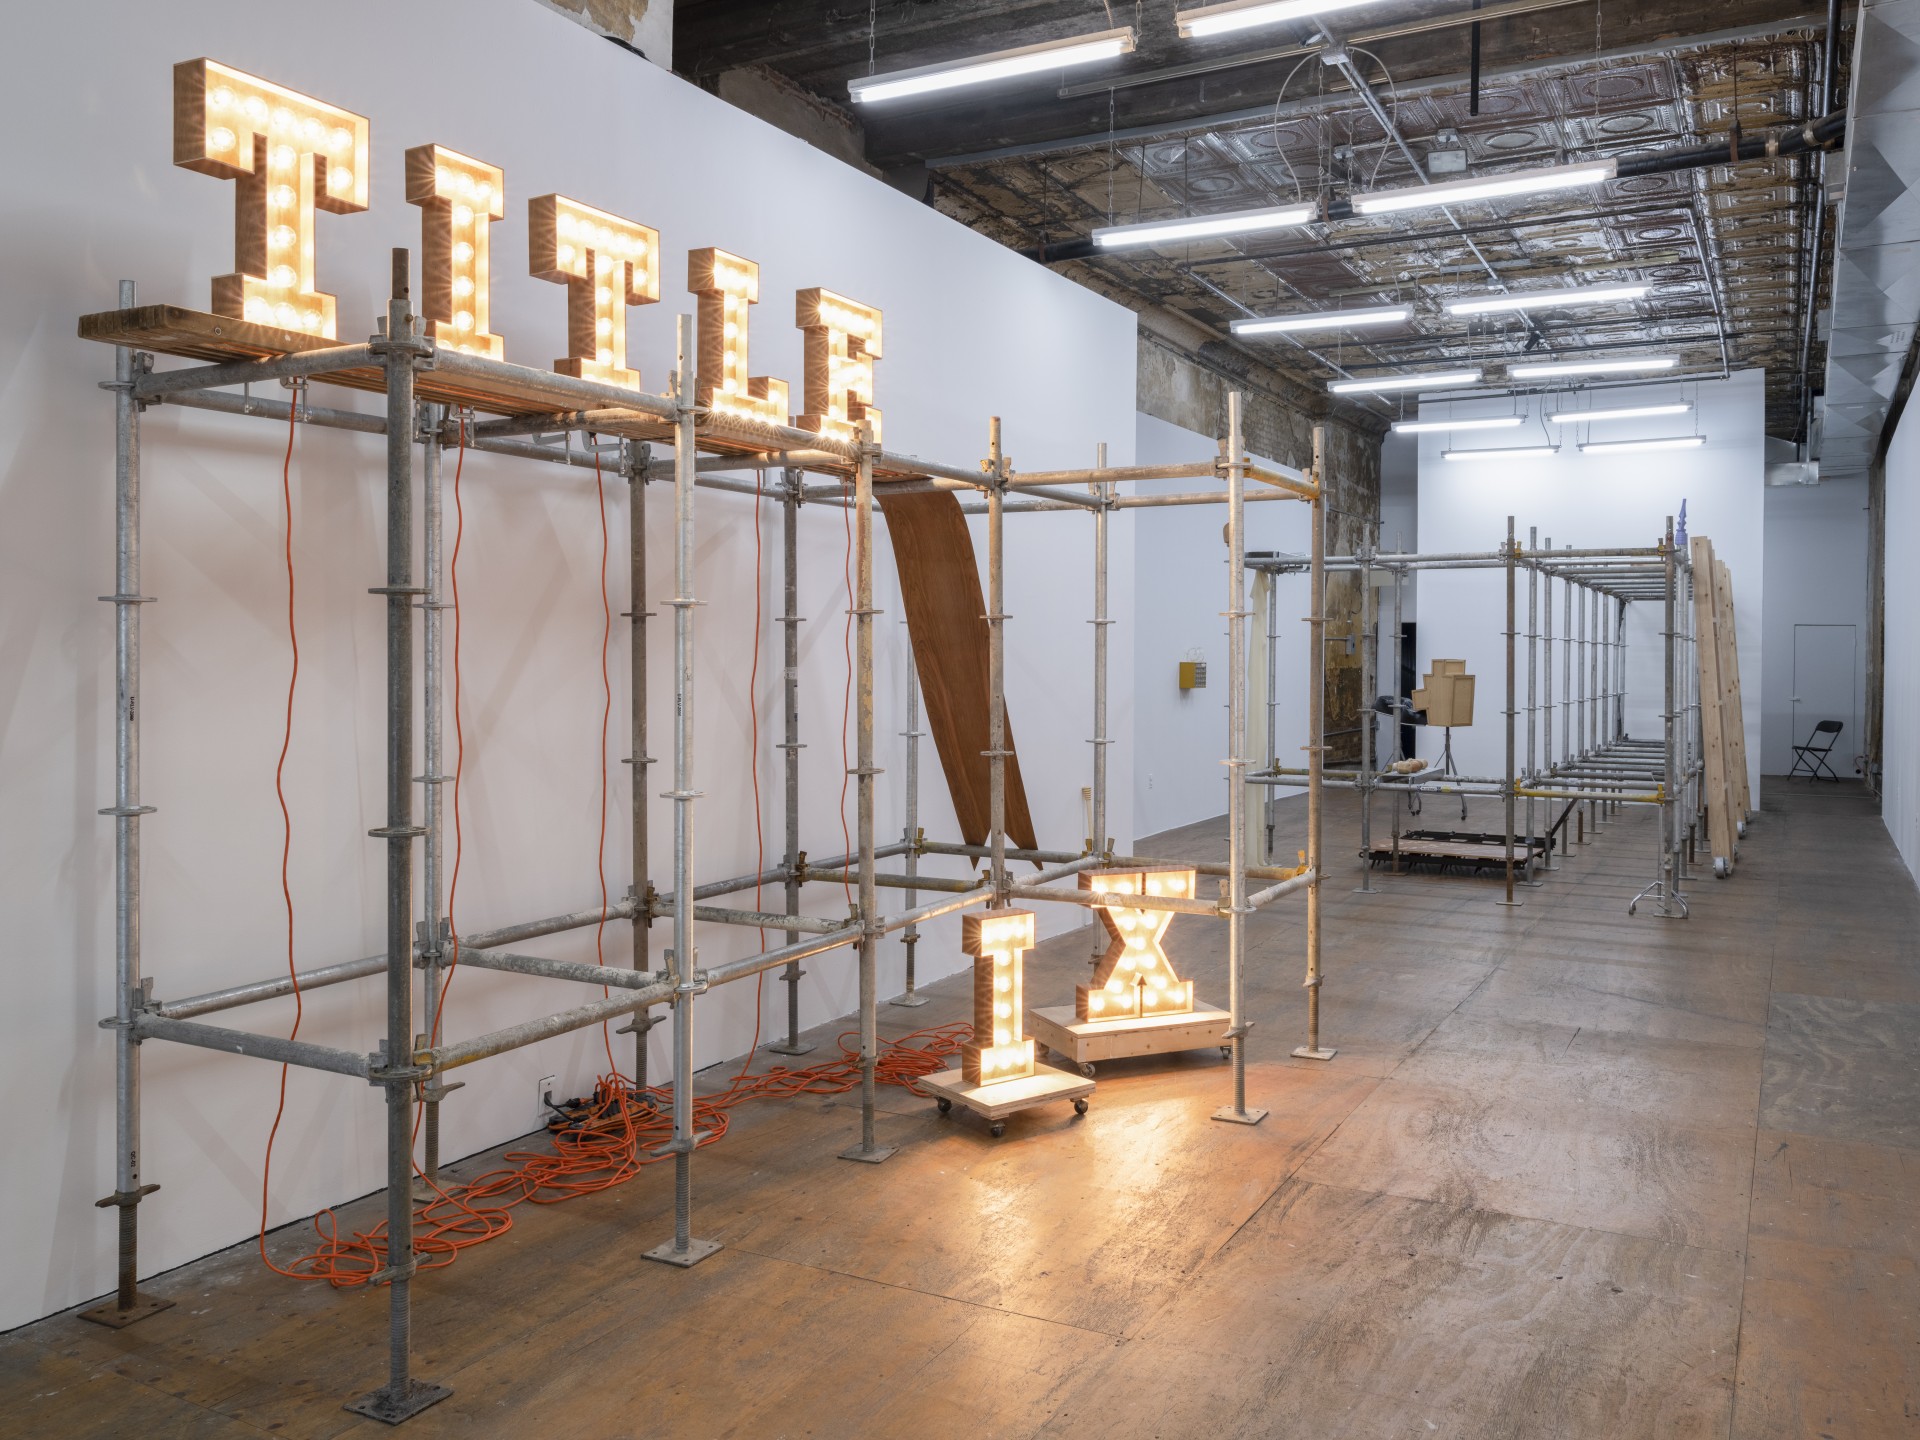 Anna Campbell, *Title IX* (detail), 2022, mahogany veneer, plywood, lightbulbs, clamps, electrical cords, dollies, installation view at Participant Inc. Photo: Daniel Kukla.